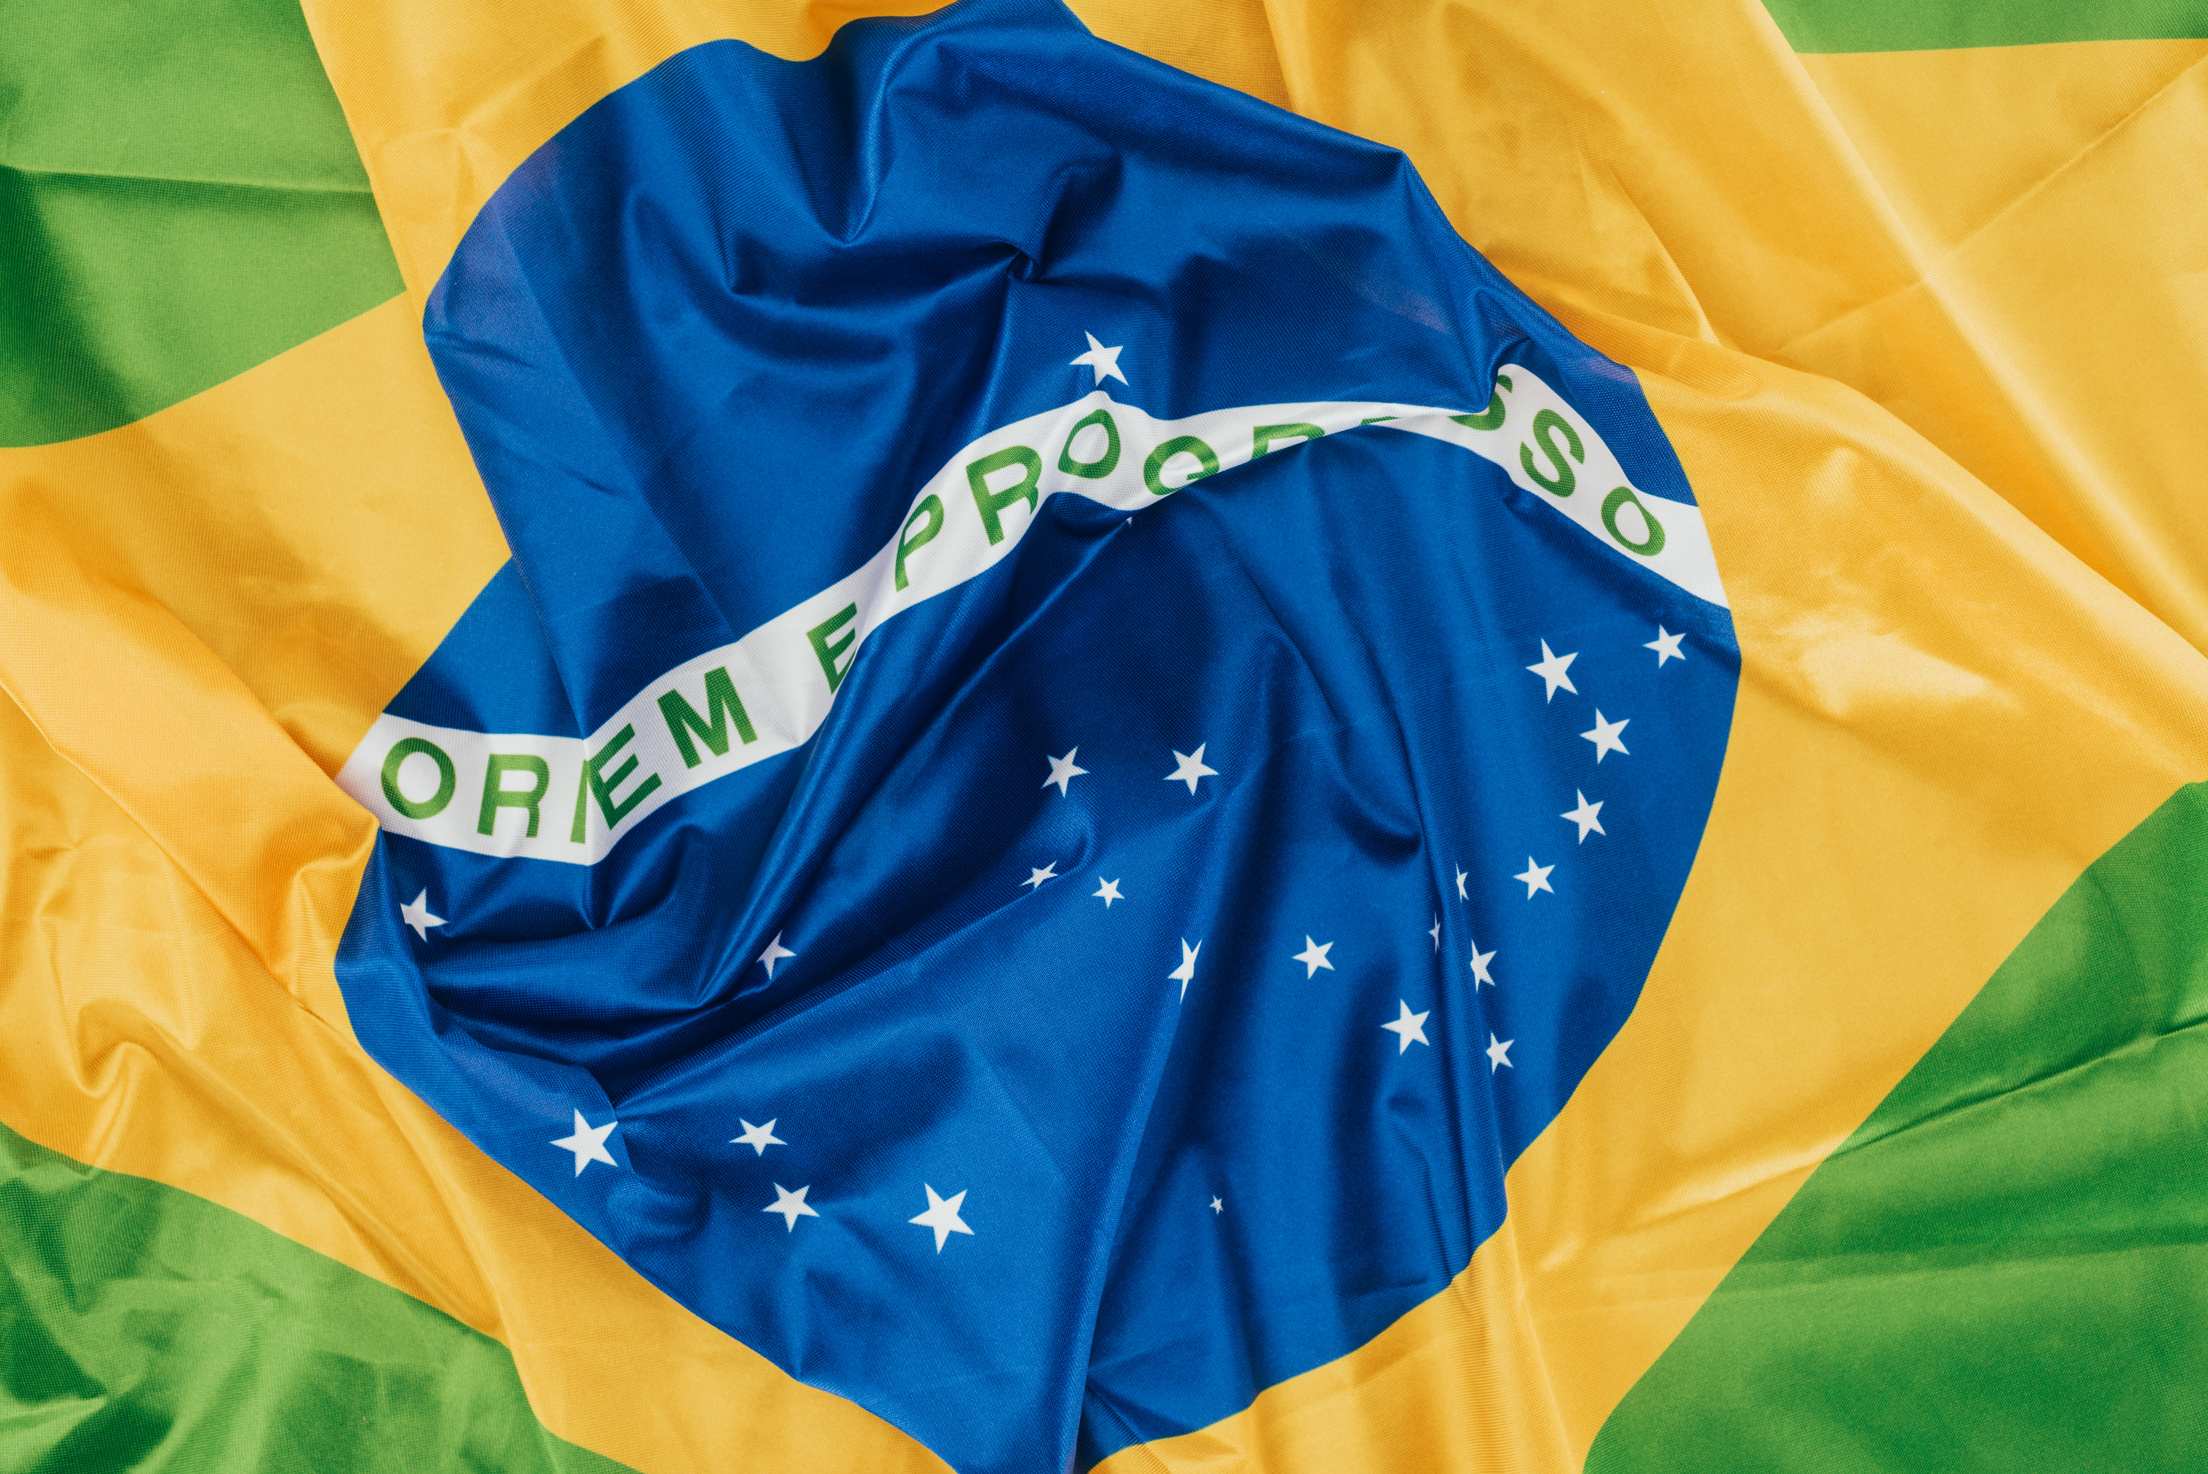 Flags of Brazil